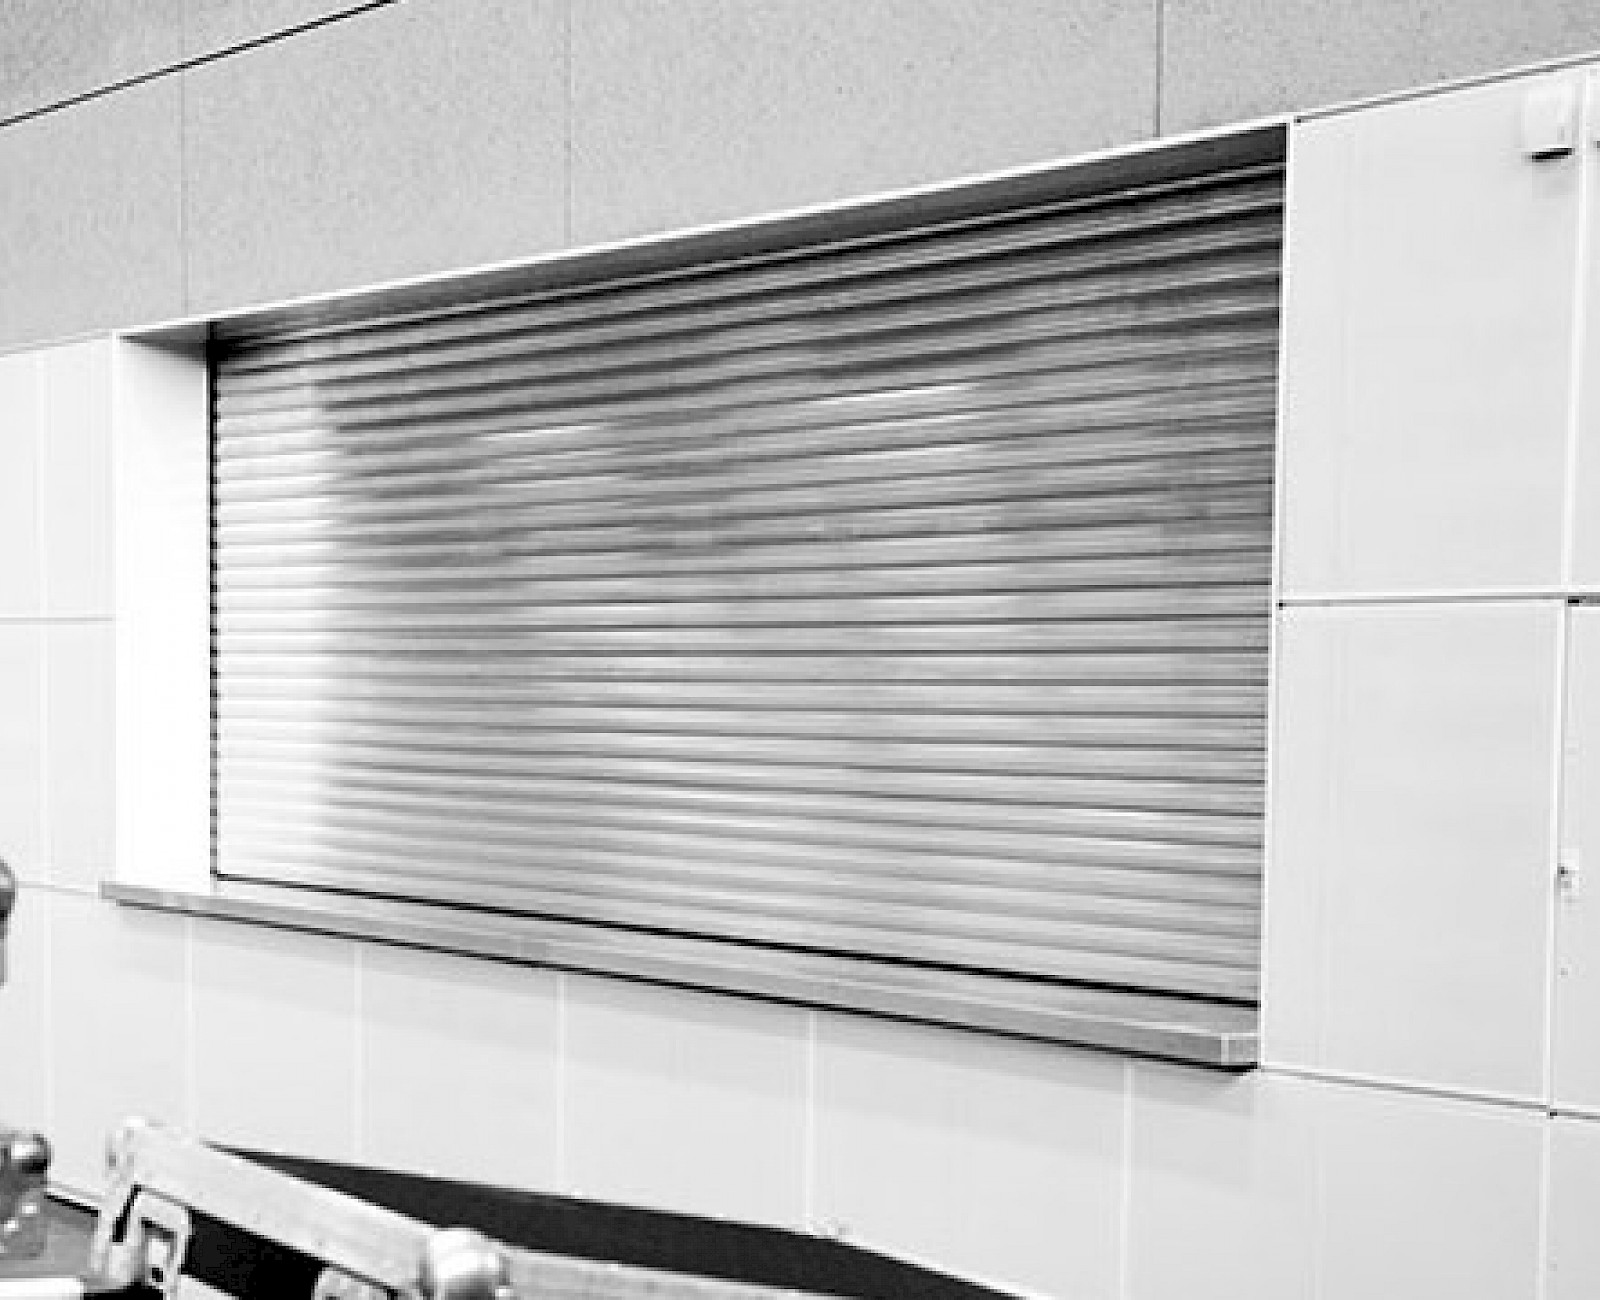 Counter closed by stainless steel security roller shutters